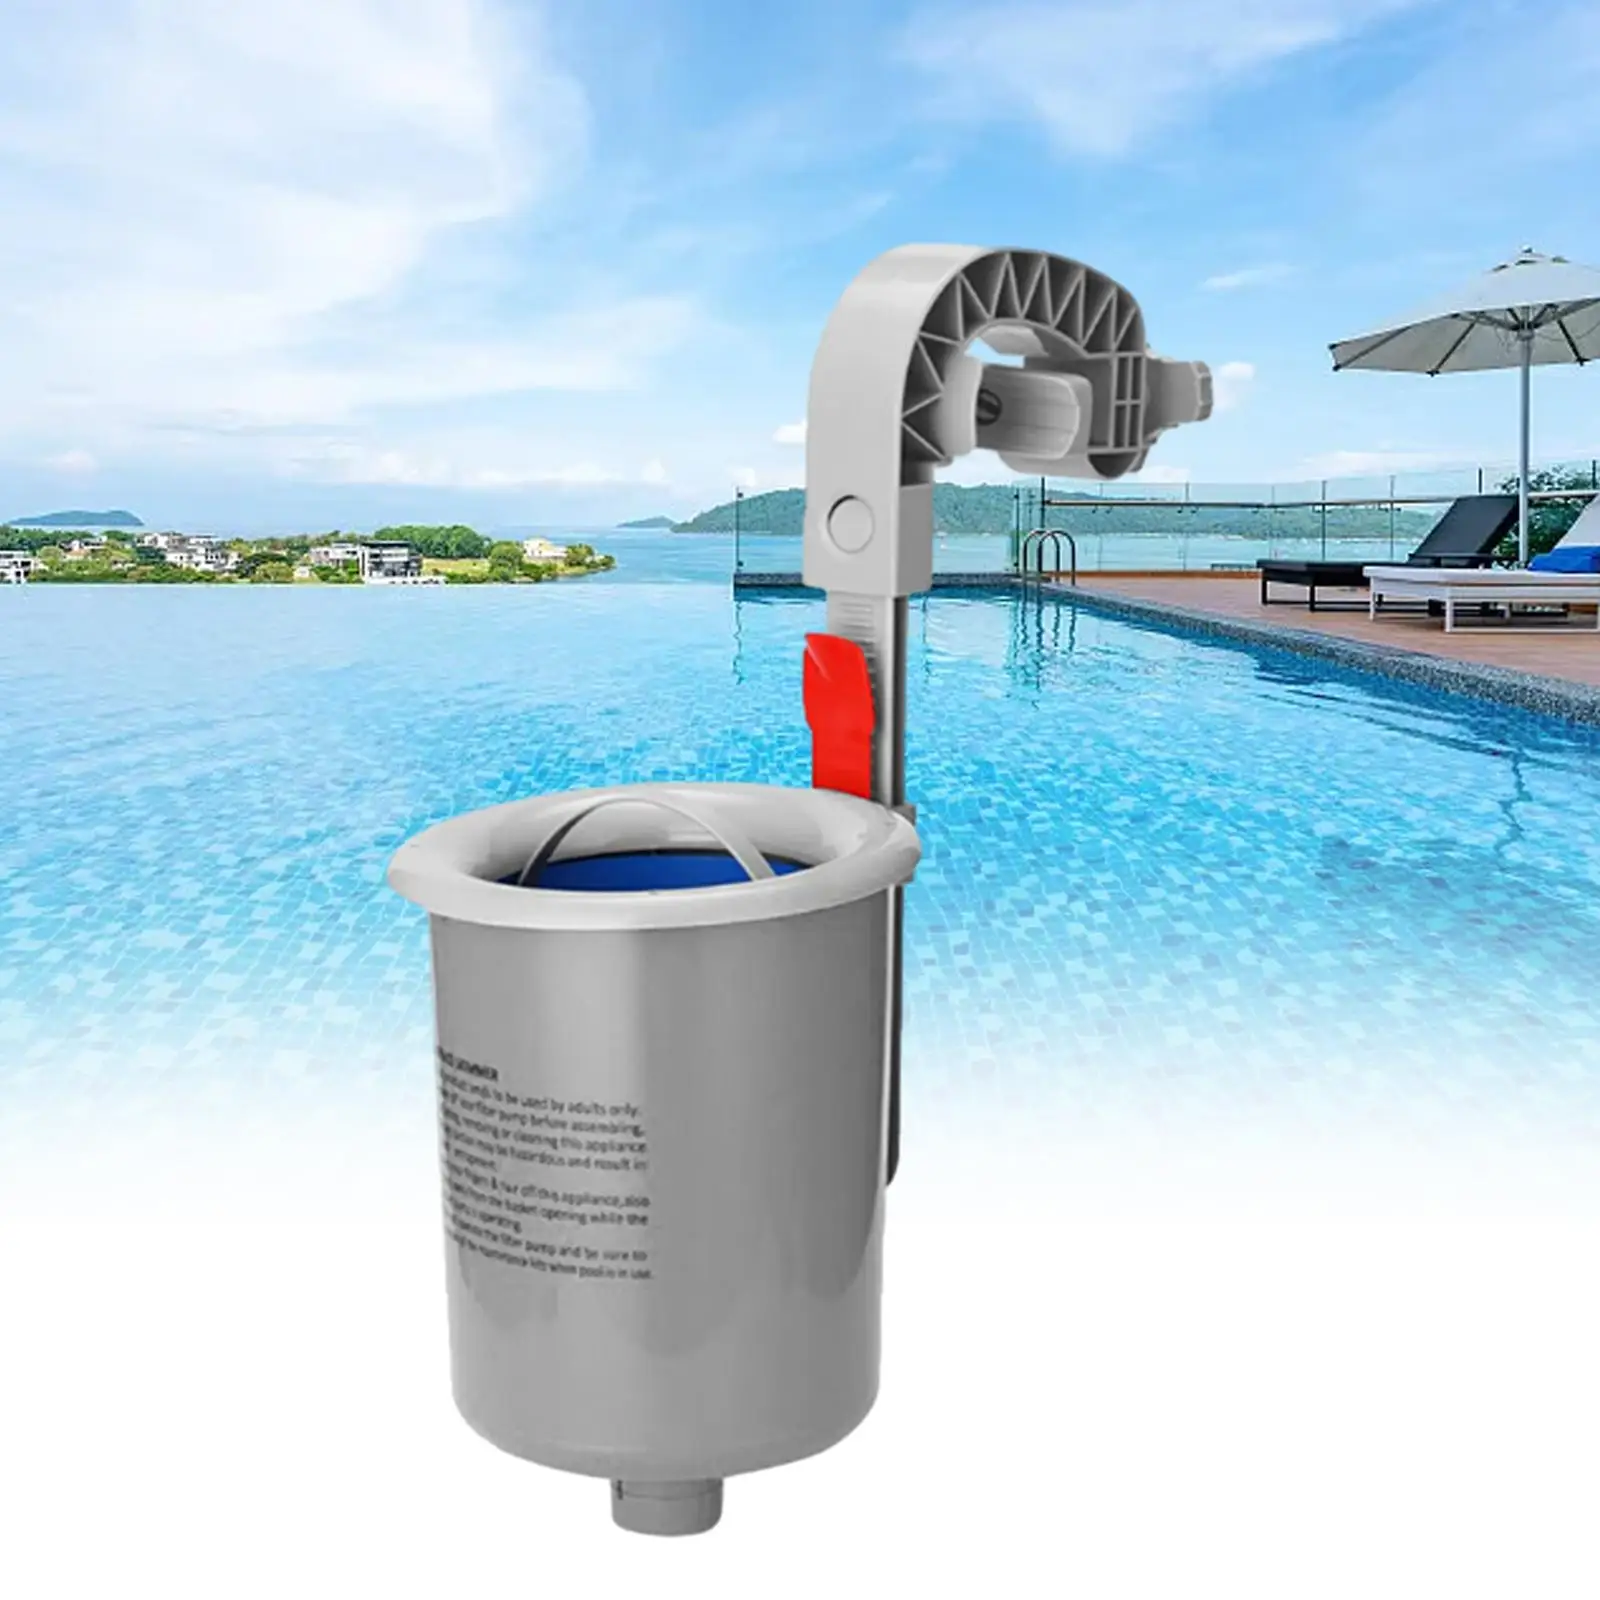 Automatic Pool Skimmer Wall Mount Floating Pool Filter Pool Maintenance Cleaner with Basket Durable Surface Skimmer Leaf